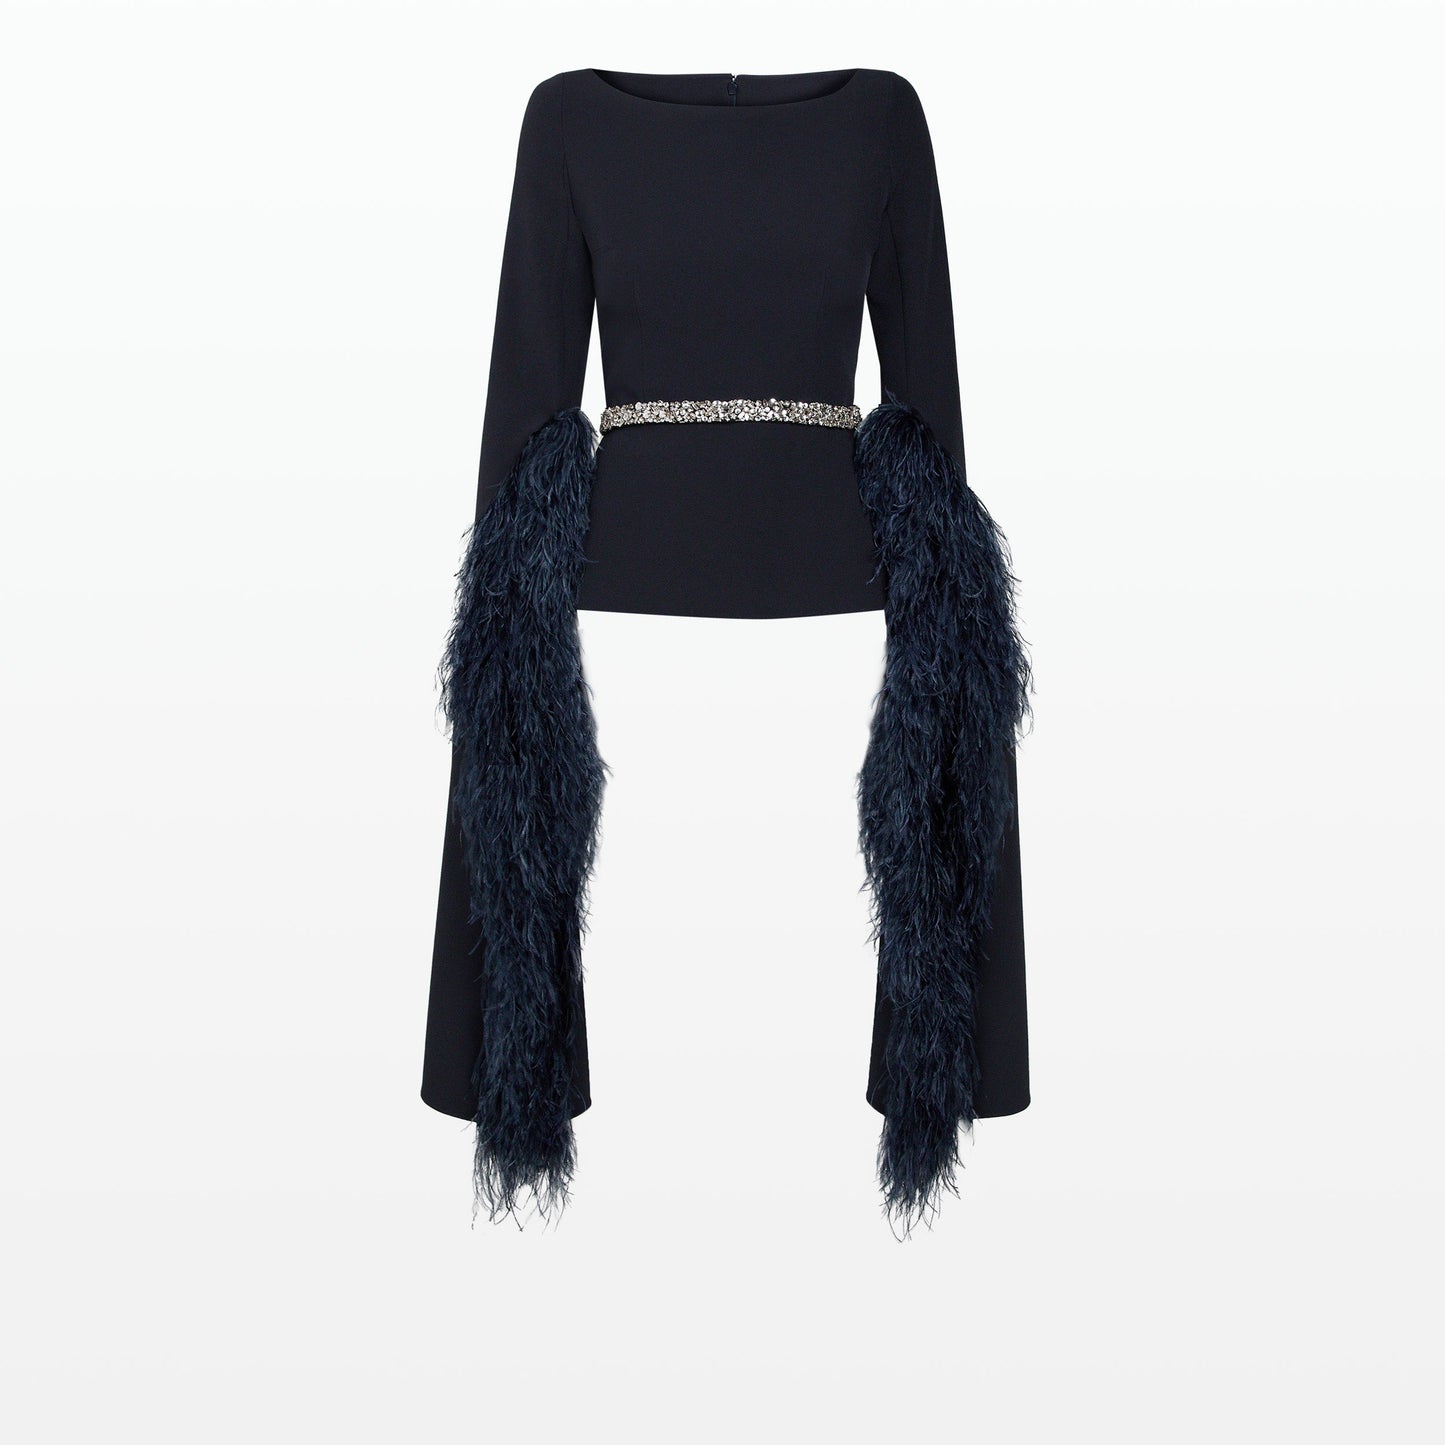 Tavia Midnight Navy Feather-Trimmed Top